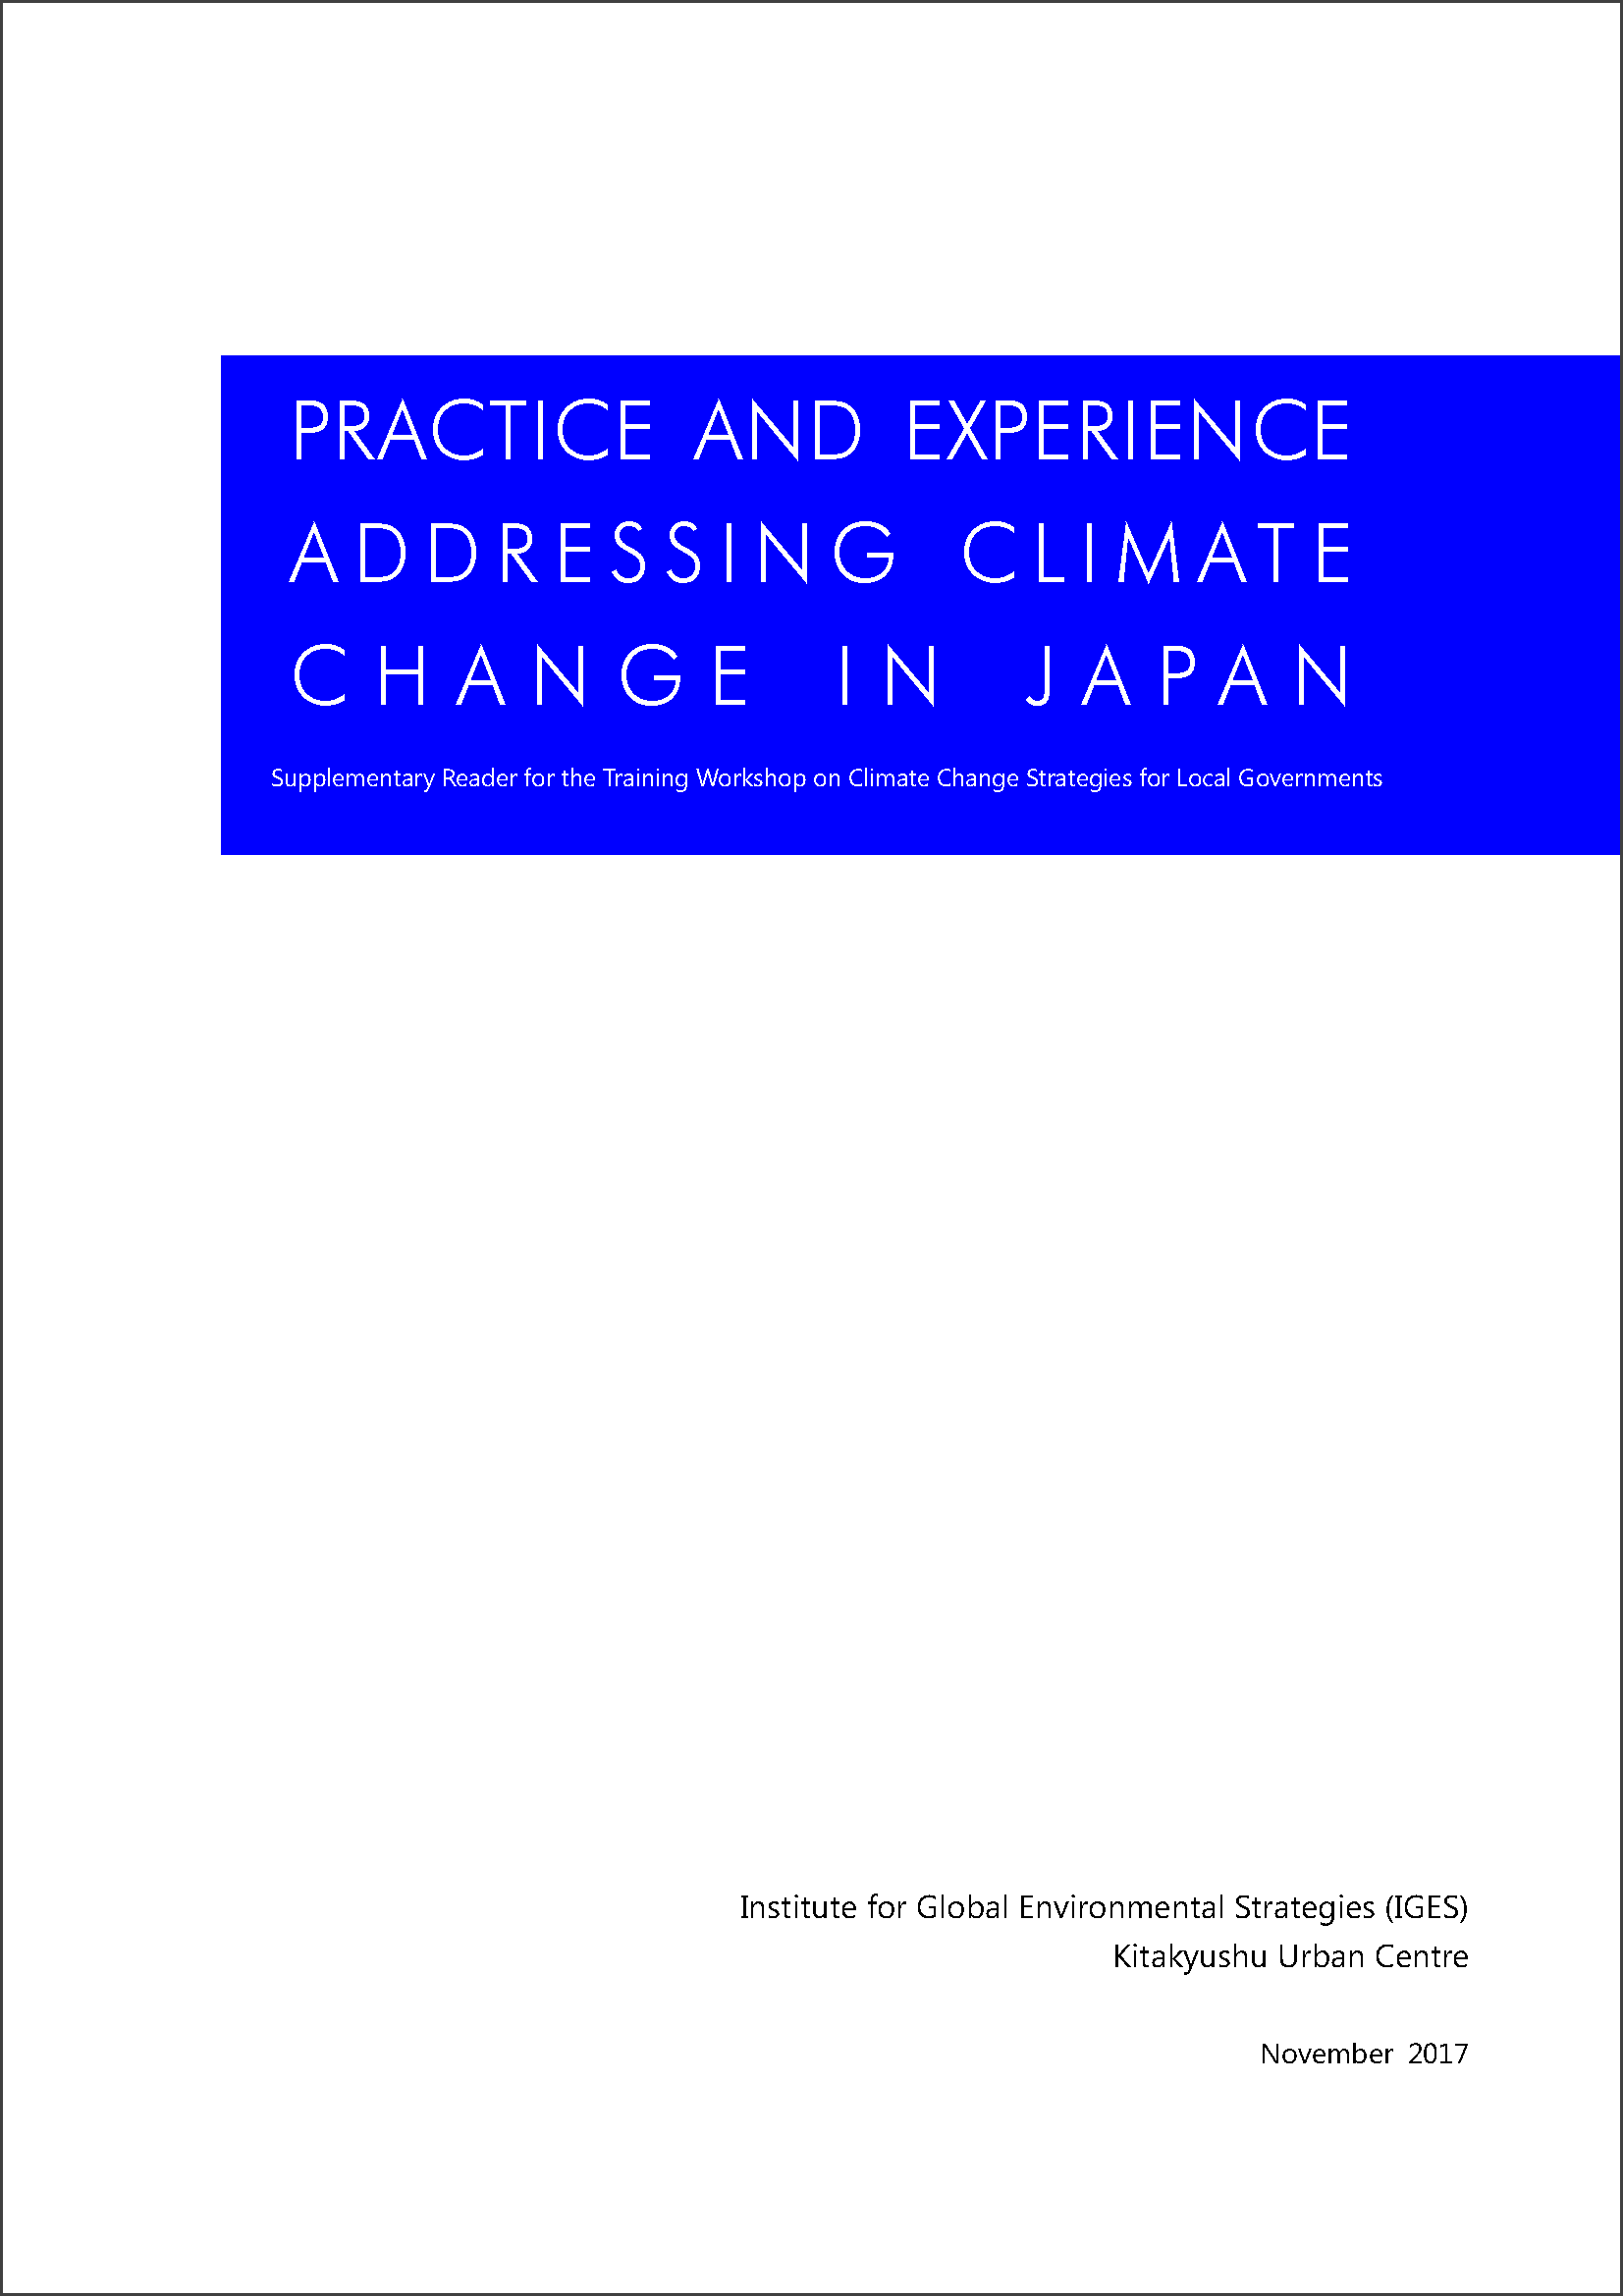 PRACTICE AND EXPERIENCE OF ADDRESSING CLIMATE CHANGE IN JAPAN